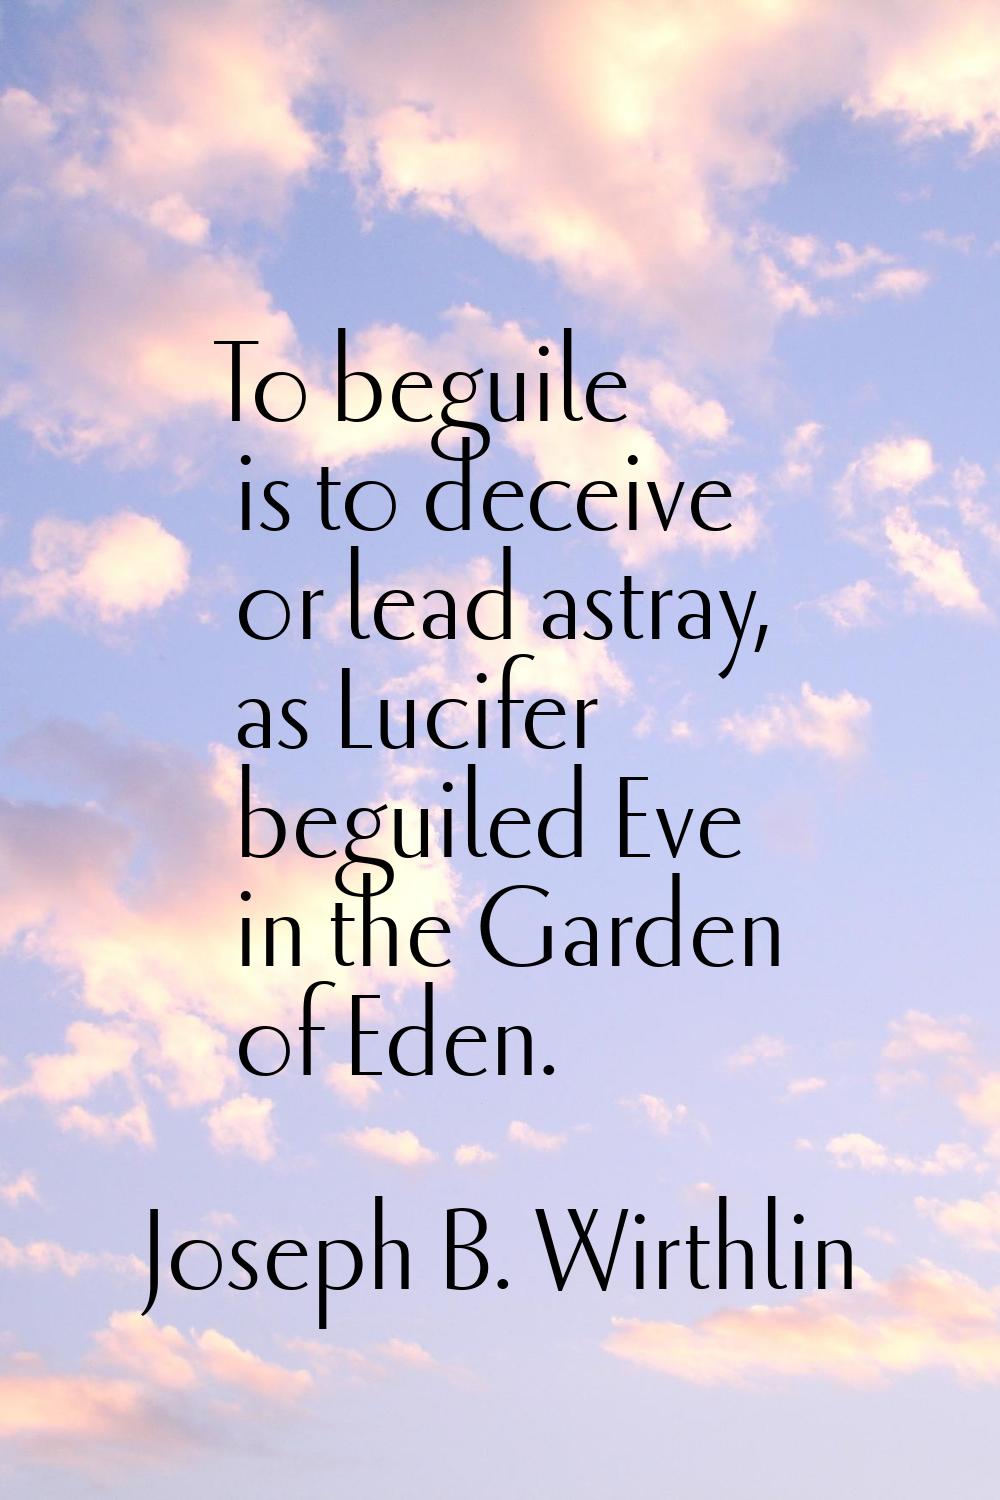 To beguile is to deceive or lead astray, as Lucifer beguiled Eve in the Garden of Eden.